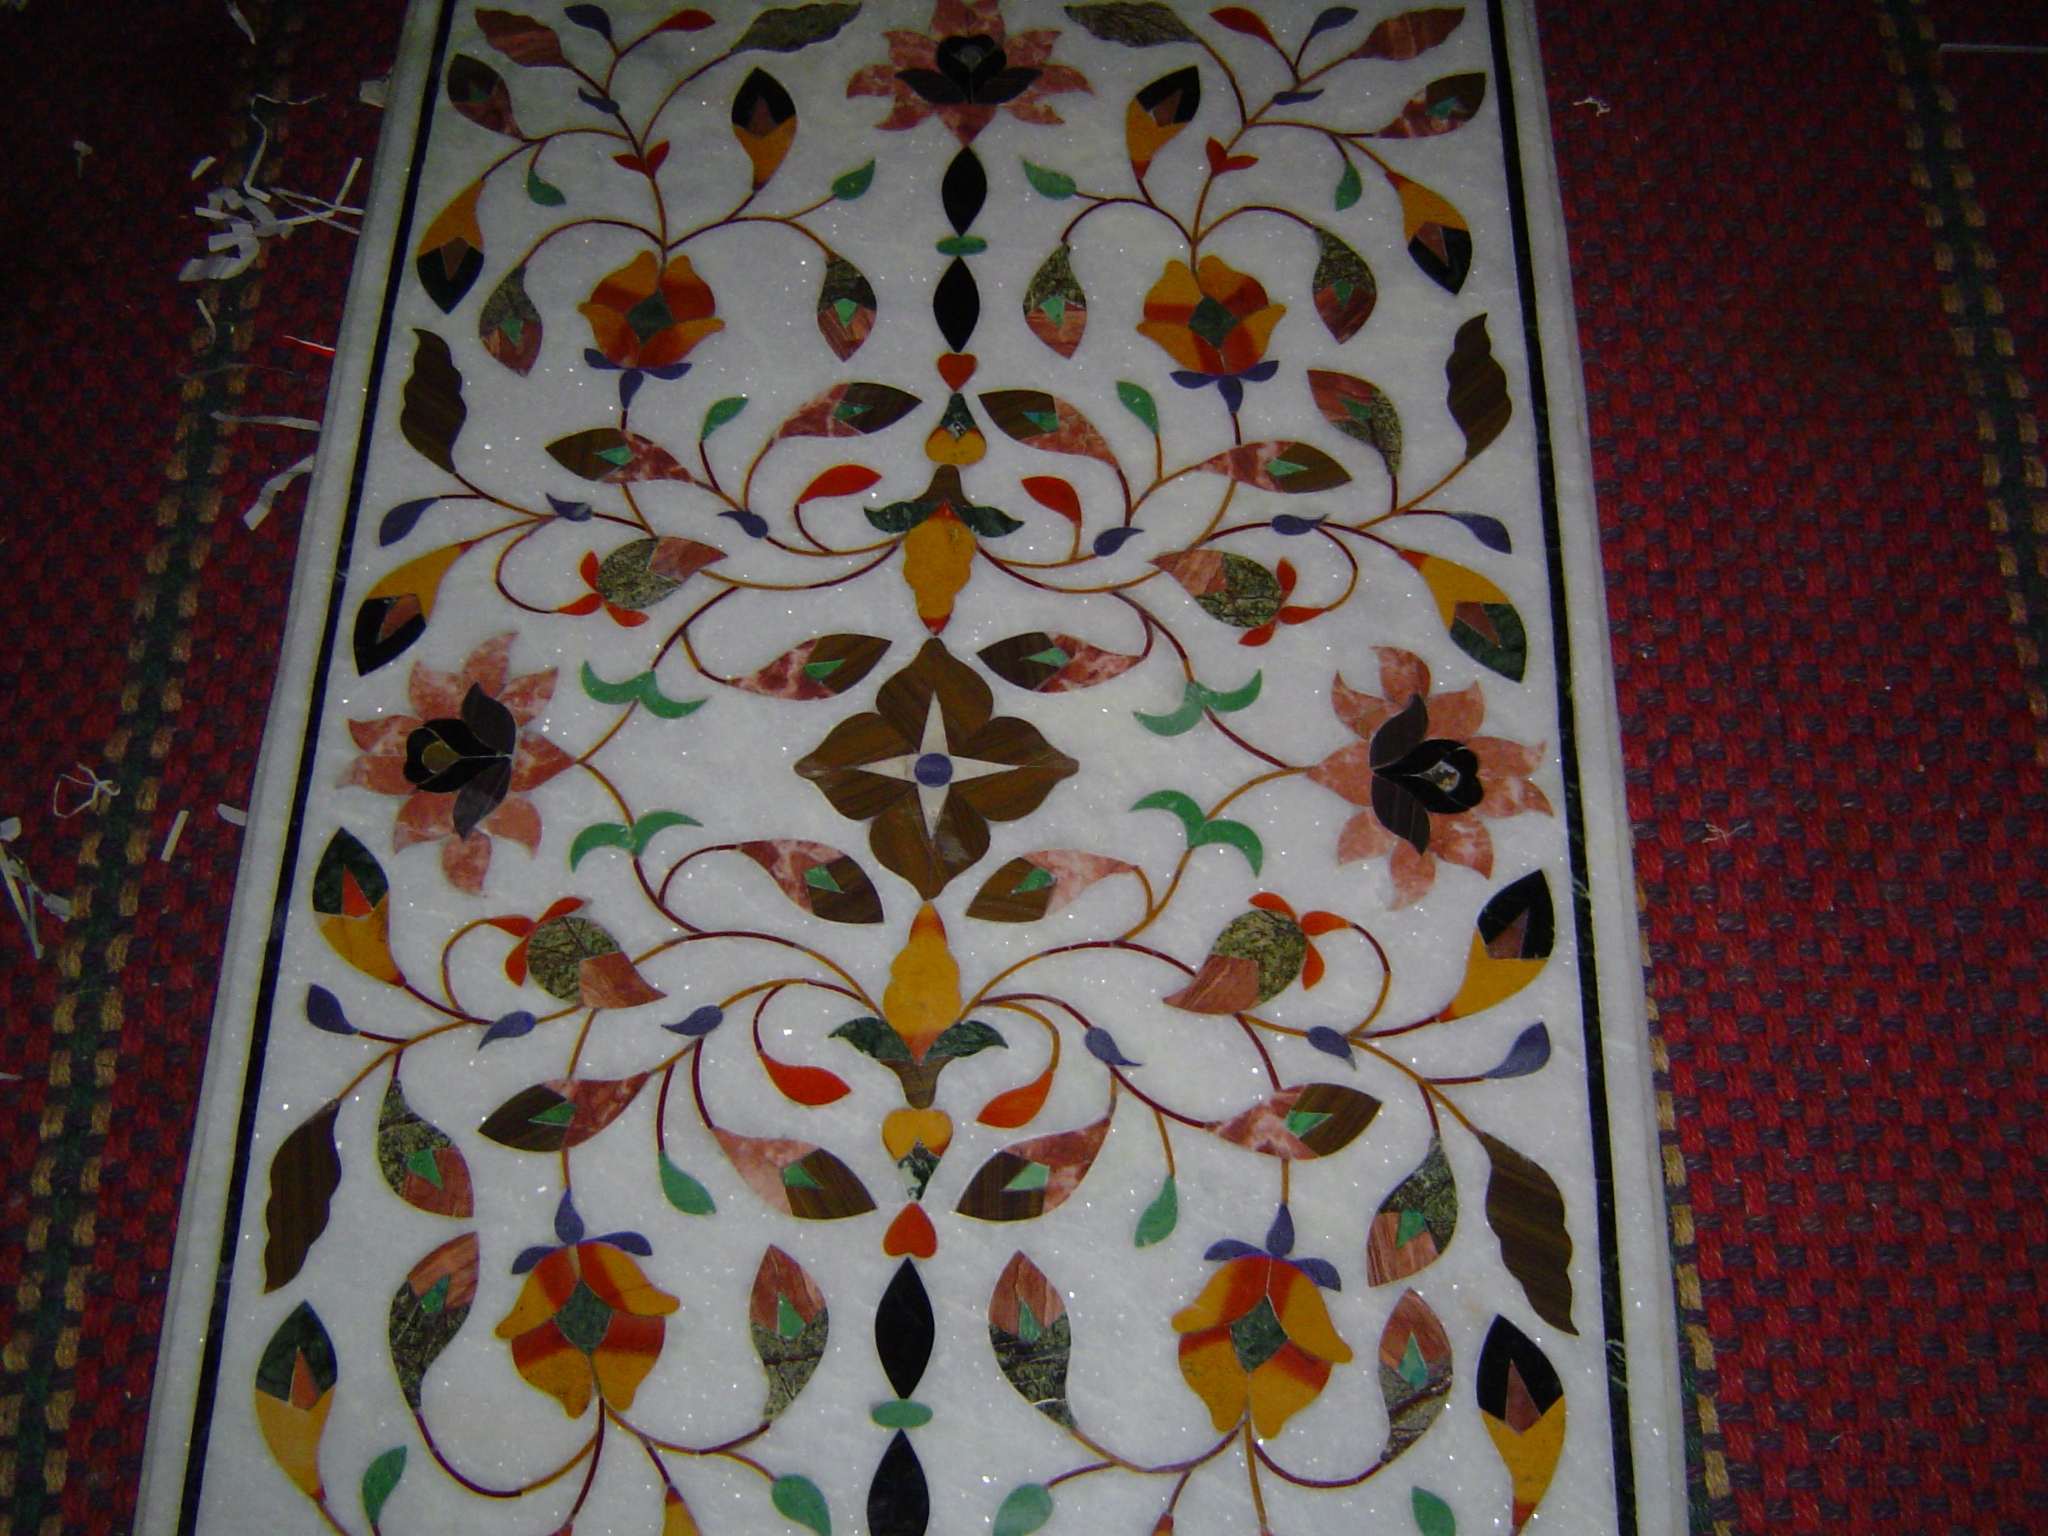 Kashmir Handicrafts Preserves The Traditional Marble Inlay